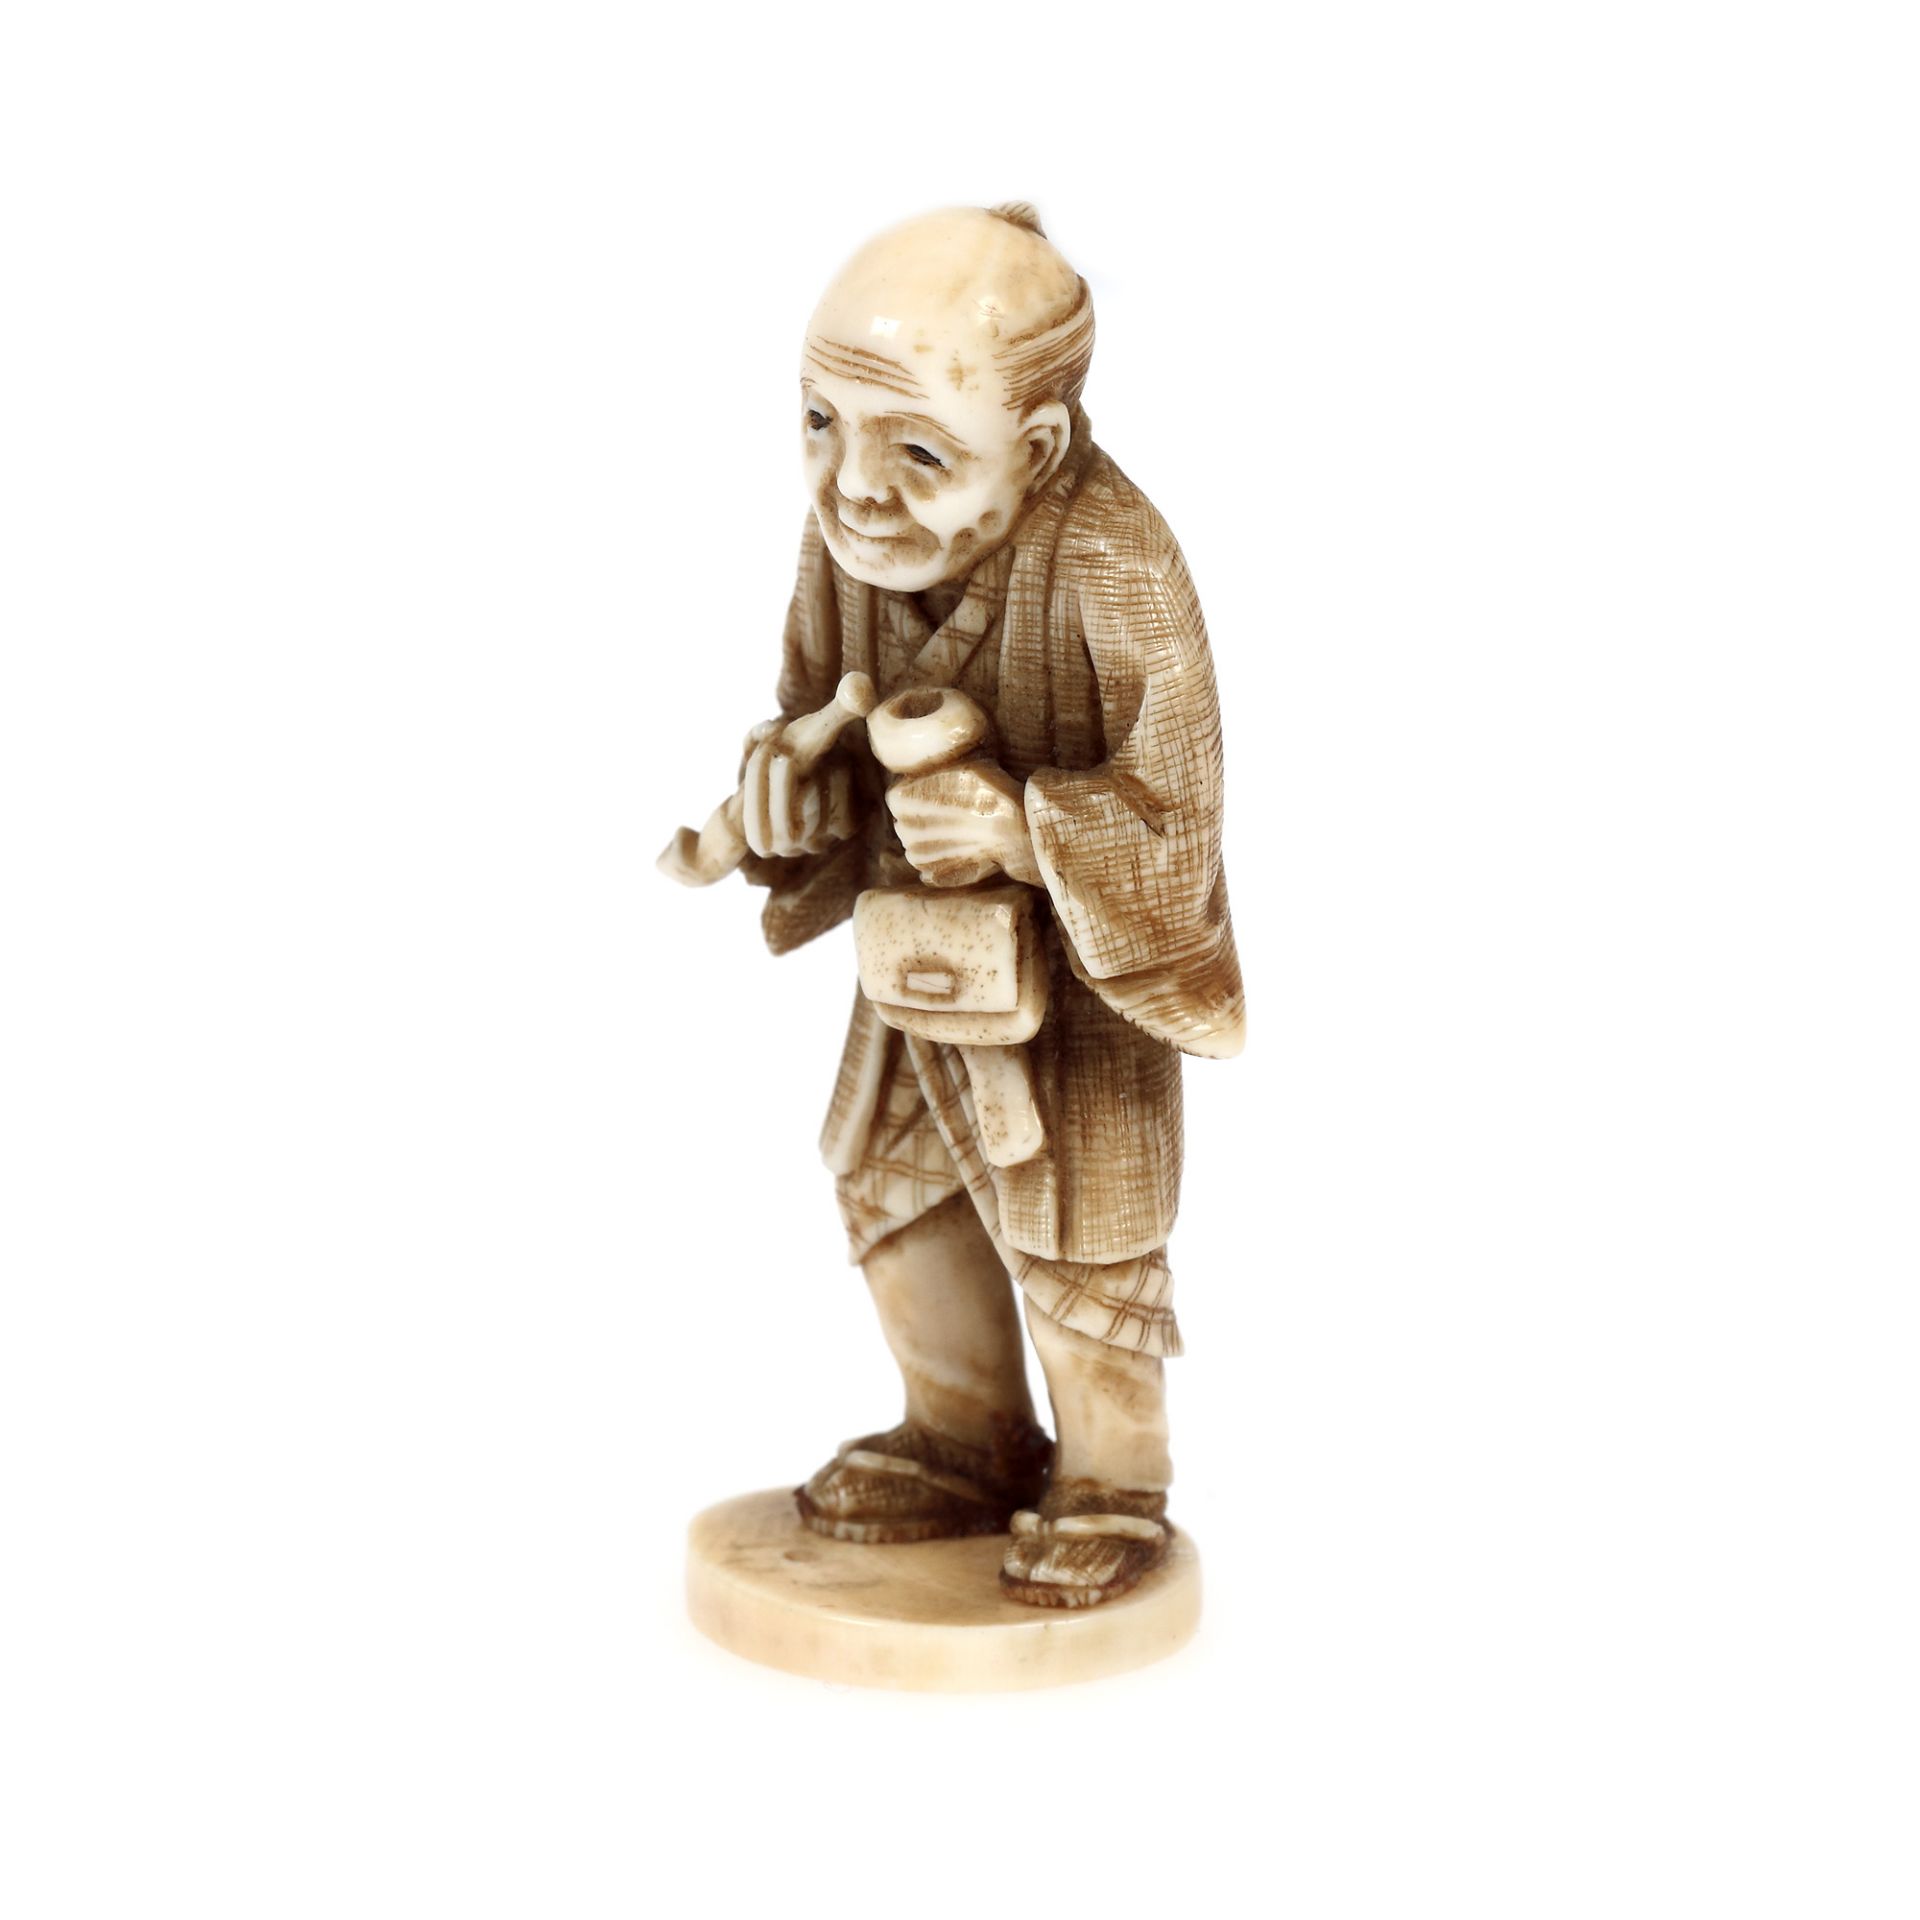 Ivory Netsuke, depicting an old man preparing his pipe, signed, Japan, late 19th century - Image 2 of 4